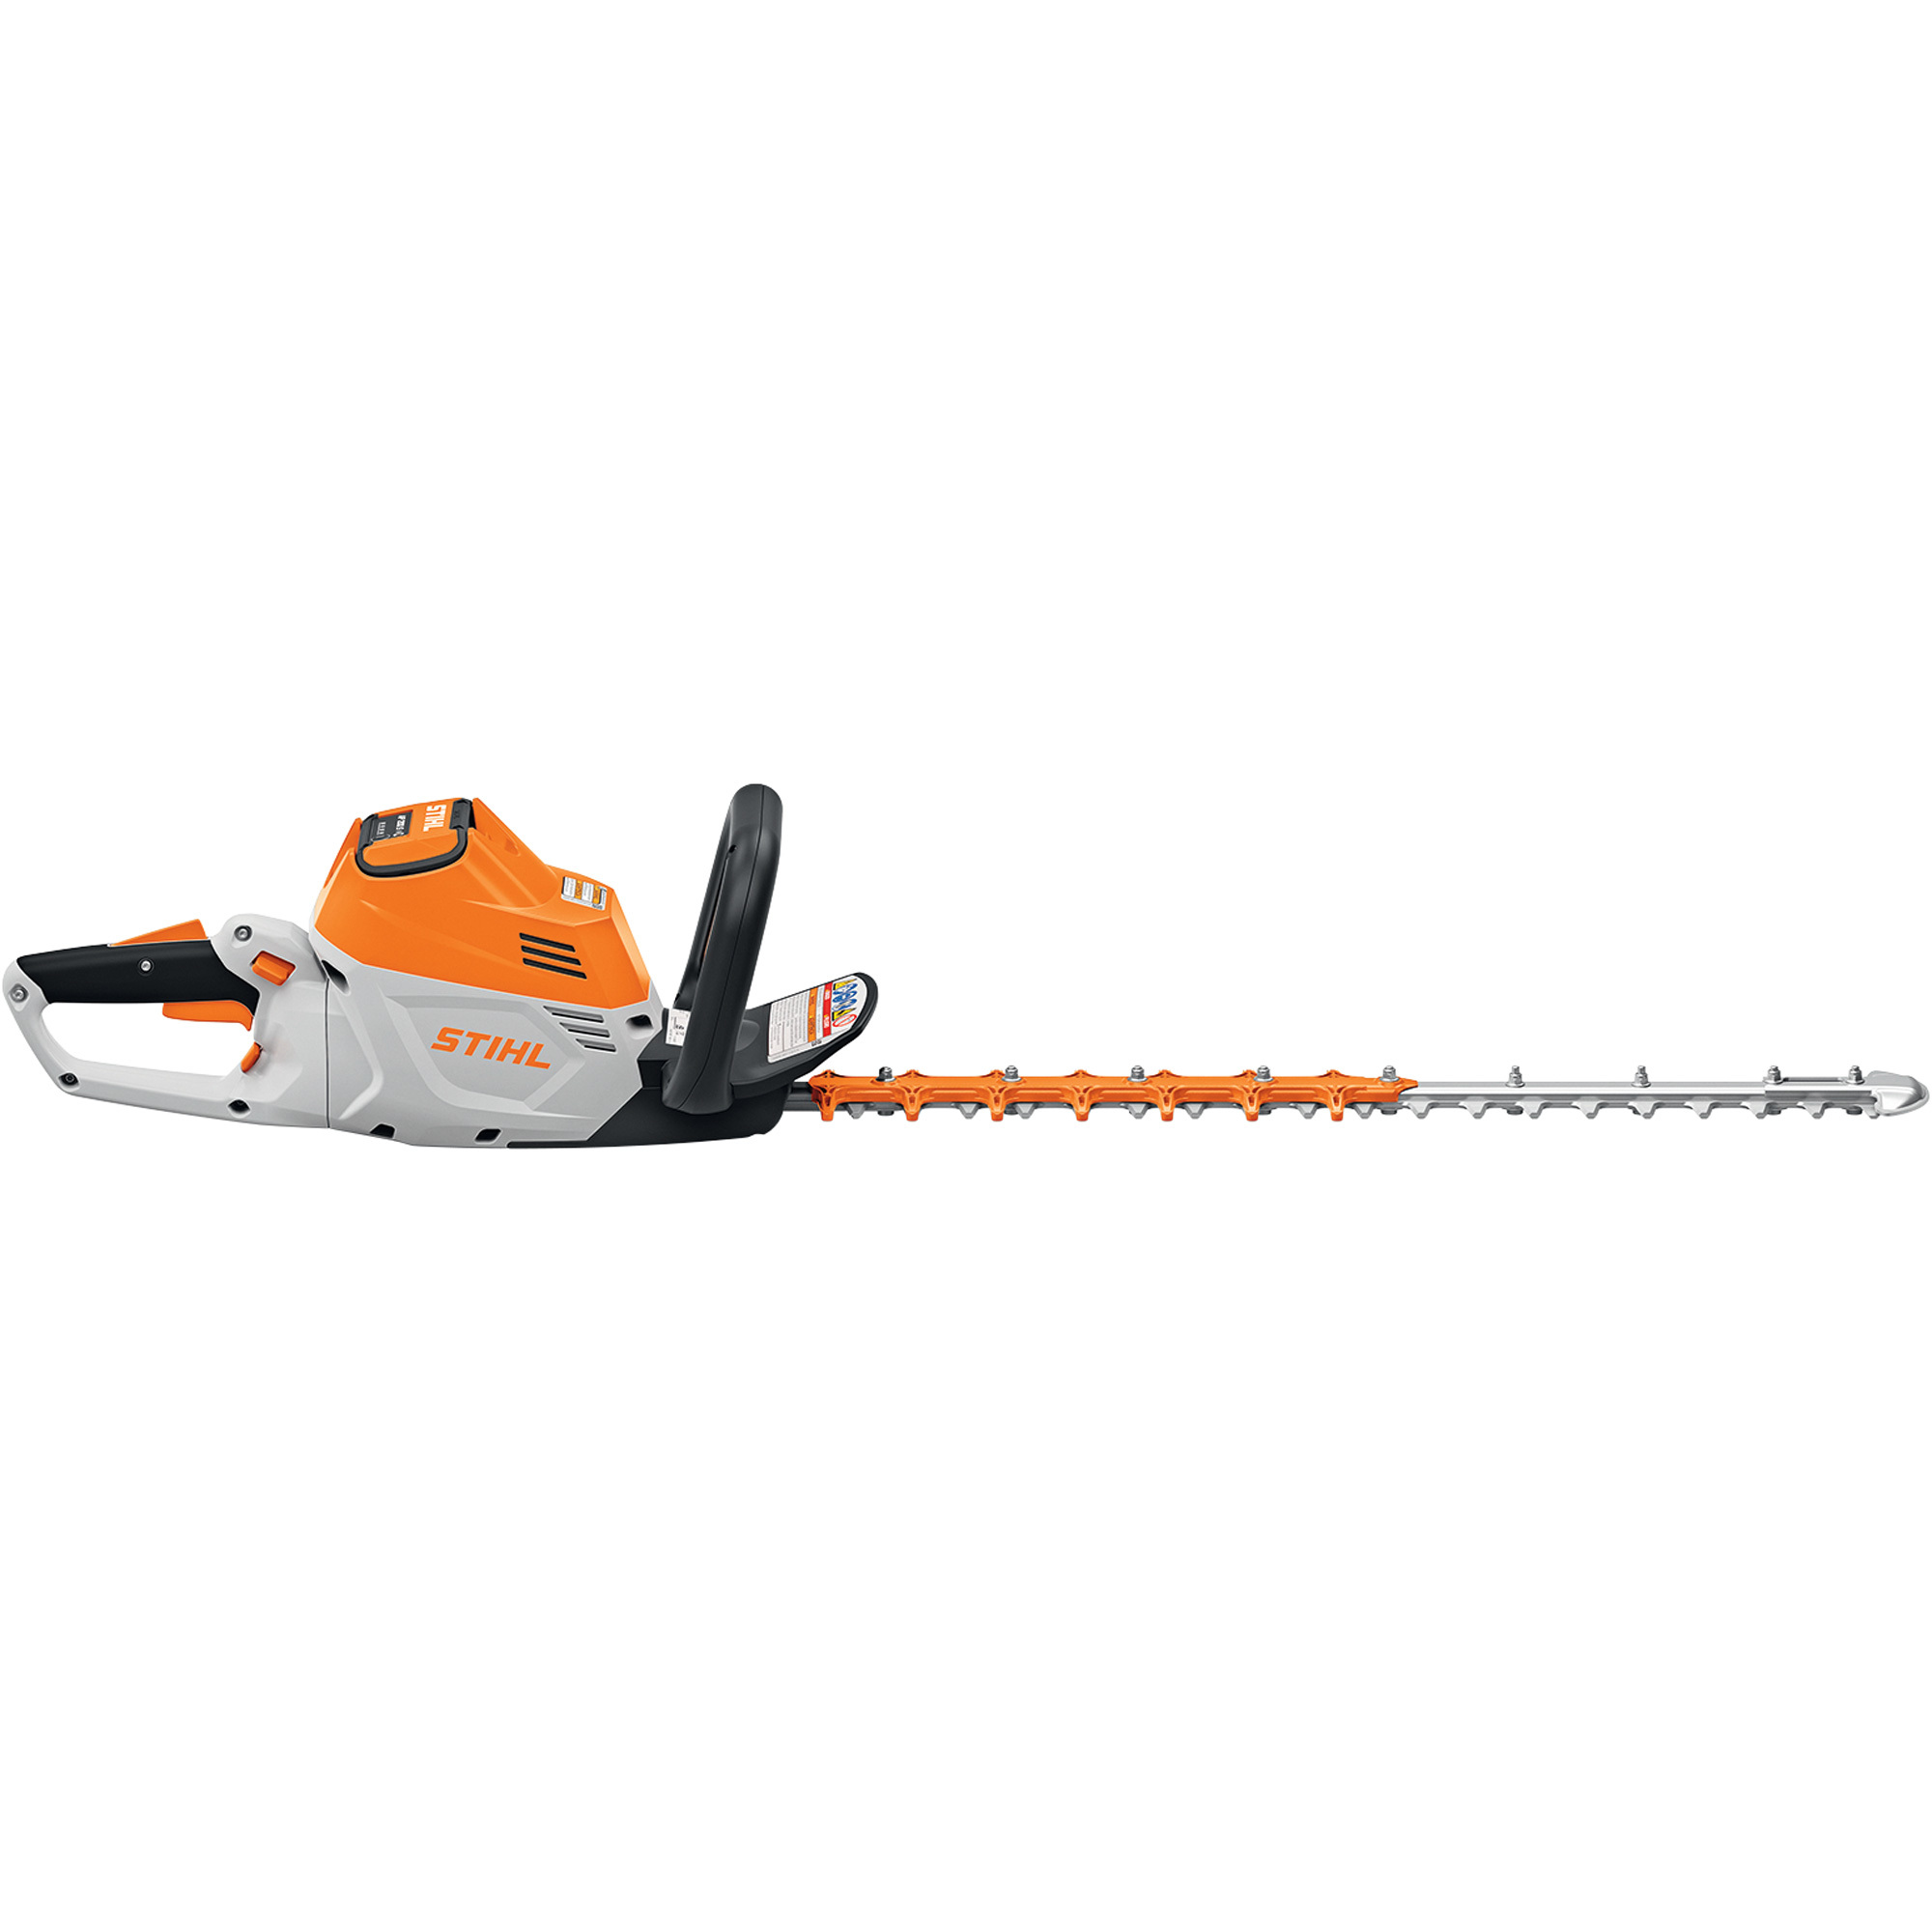 STIHL Commercial-Grade Lithium-Ion Cordless Hedge Trimmer, 23.6Inch Blade, Model HSA 100